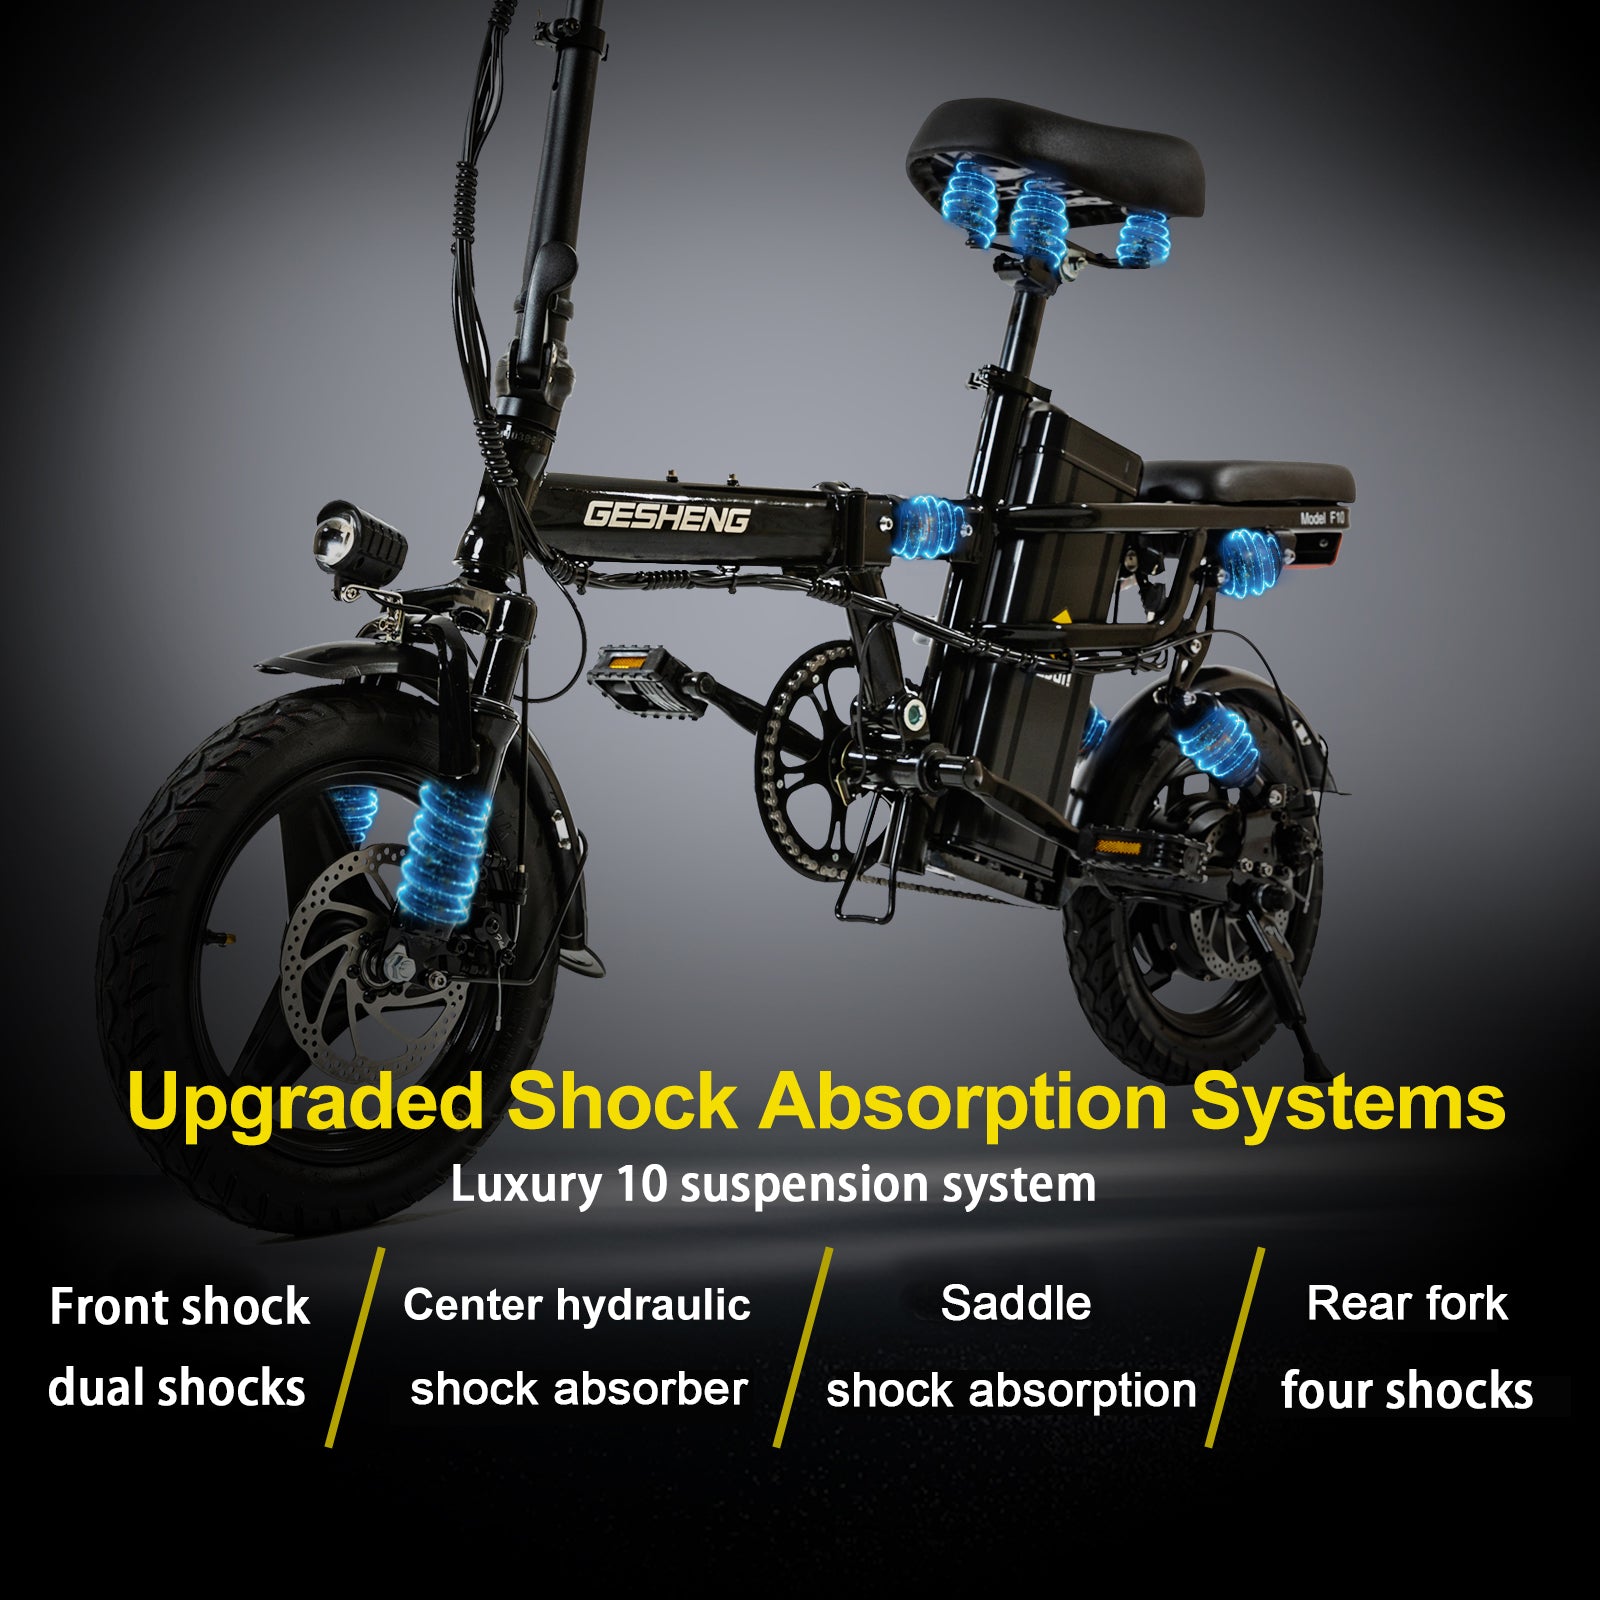 Polarna F10 14“ Electric Bike Foldable With 400W Motor 48V 17.5Ah Battery Luxury 10 suspension system